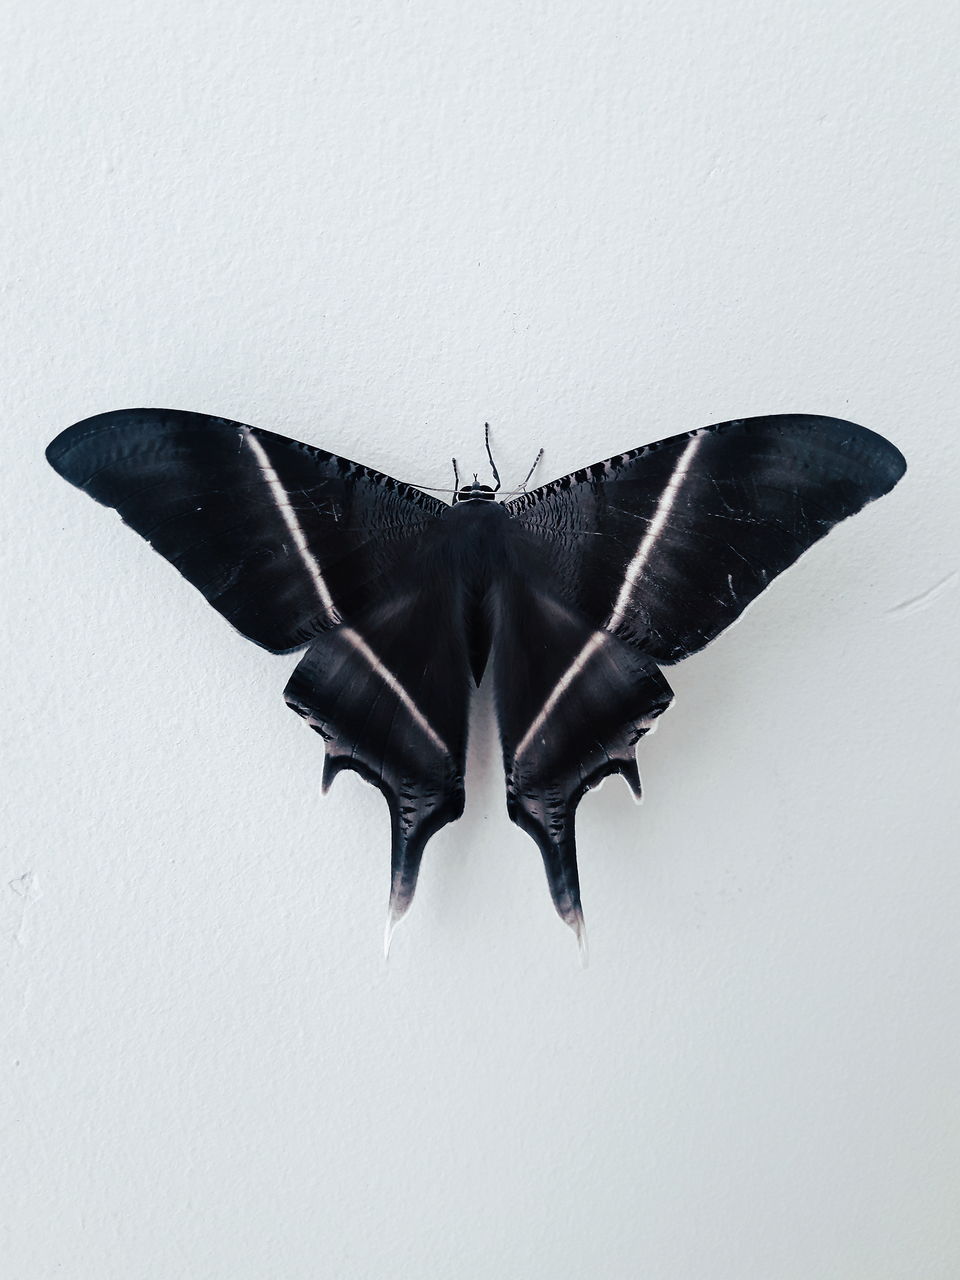 animal, animal themes, wing, flying, no people, one animal, animal wildlife, wildlife, animal body part, bat, butterfly, animal wing, nature, spread wings, black, indoors, mid-air